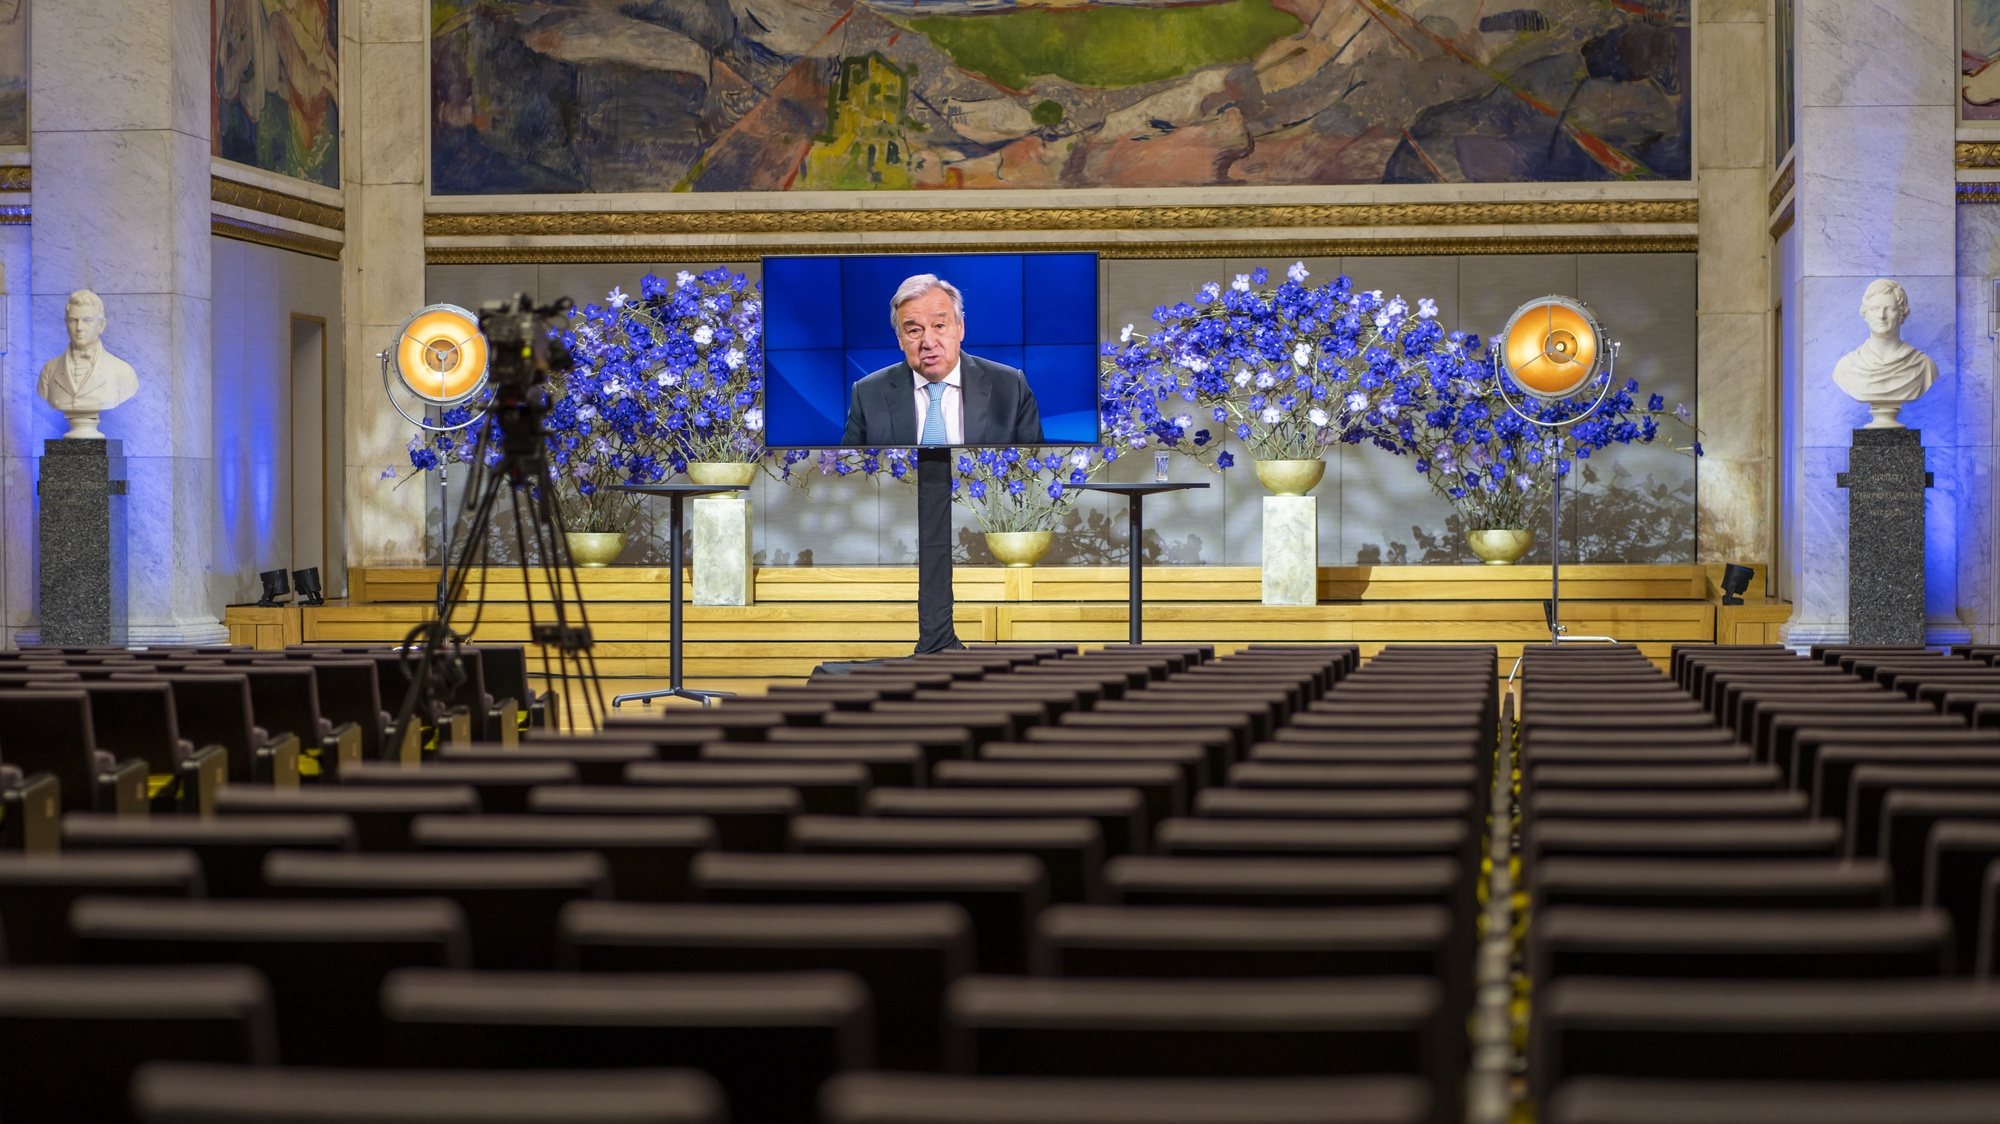 epa08877565 UN Secretary-General Antonio Guterres speaks to empty seats in the University Hall during the digital broadcast of the Nobel Peace Prize Forum 2020 in Oslo, Norway, 11 December 2020. This year&#039;s Forum&#039;s theme is &#039;Multilateralism and global governance in the wake of the Corona pandemic&#039;.  EPA/HEIKO JUNGE  NORWAY OUT